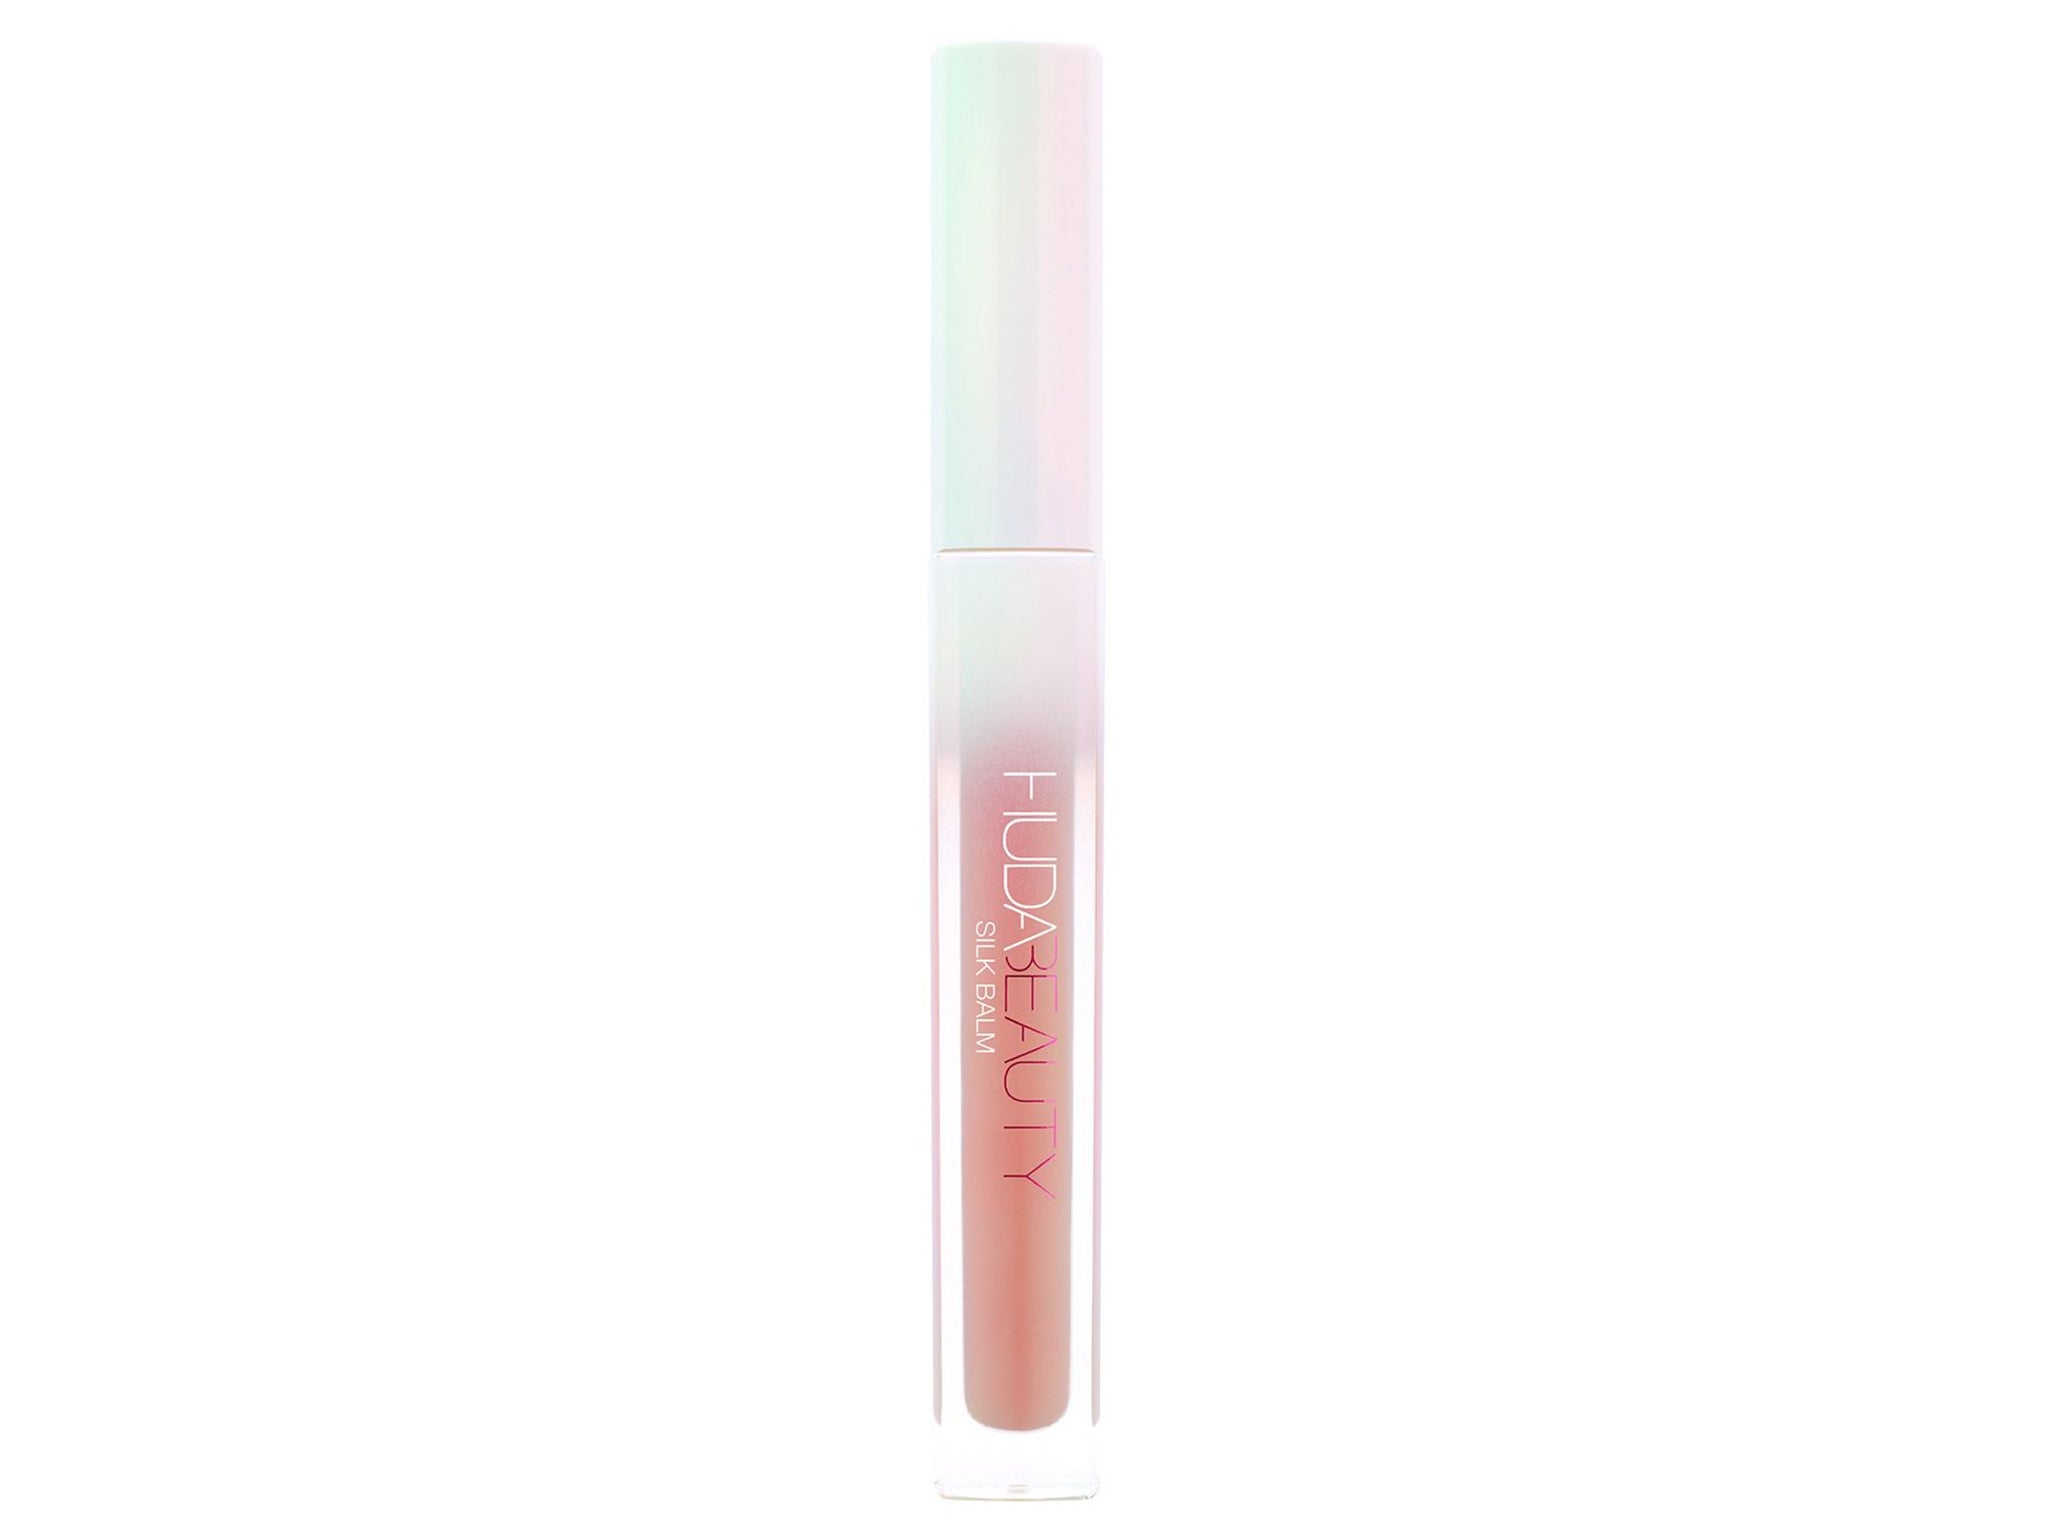 This lip balm gives a glossy, hydrating finish